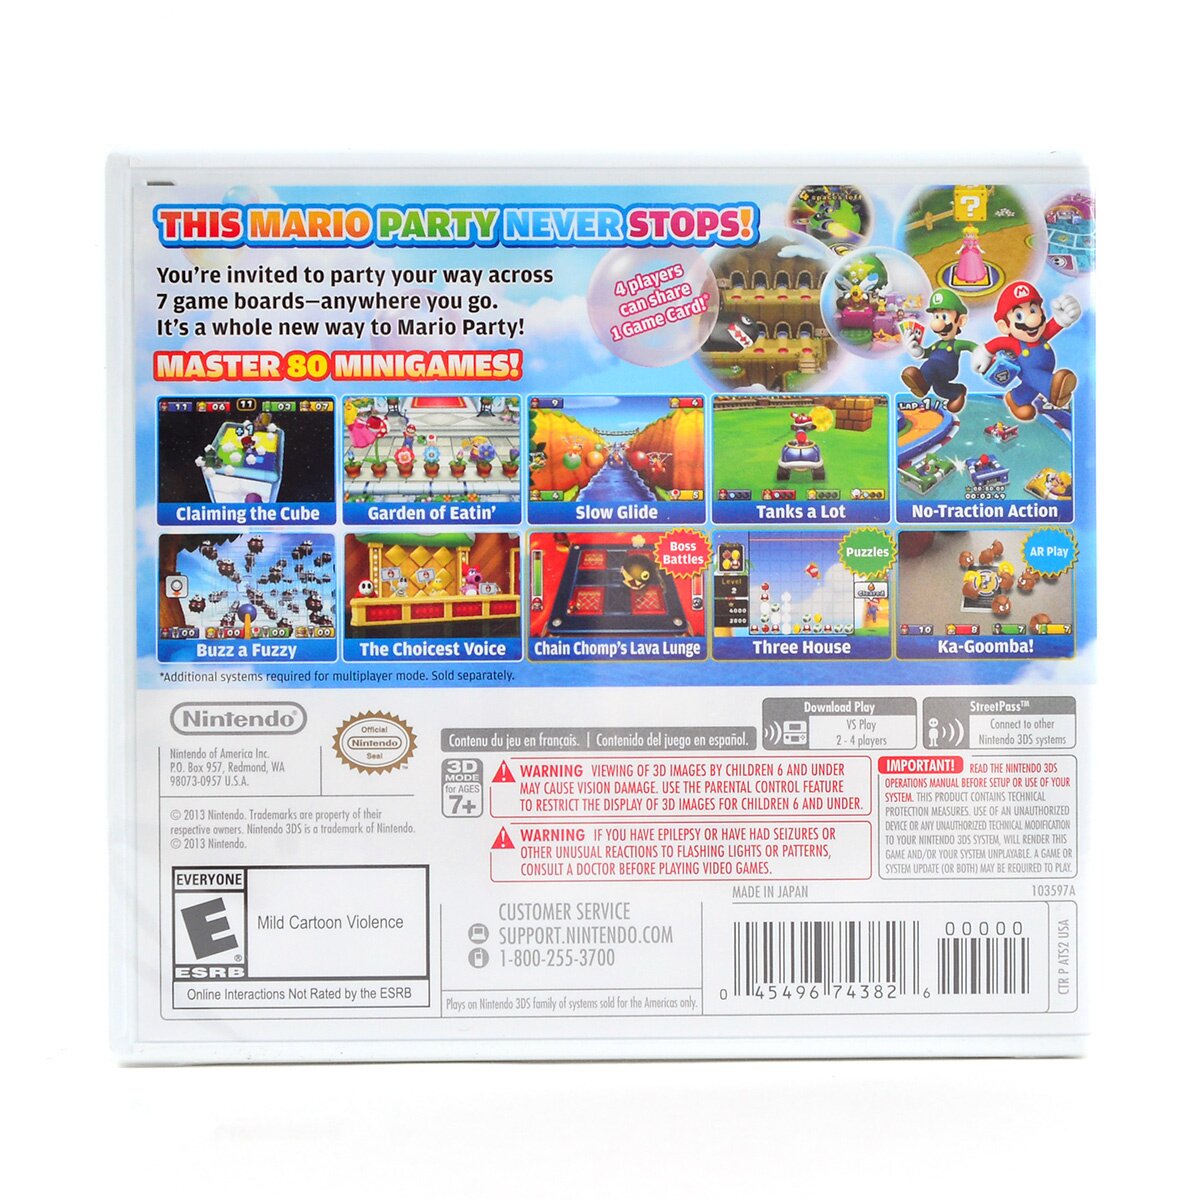 free download super mario party island tour 3ds